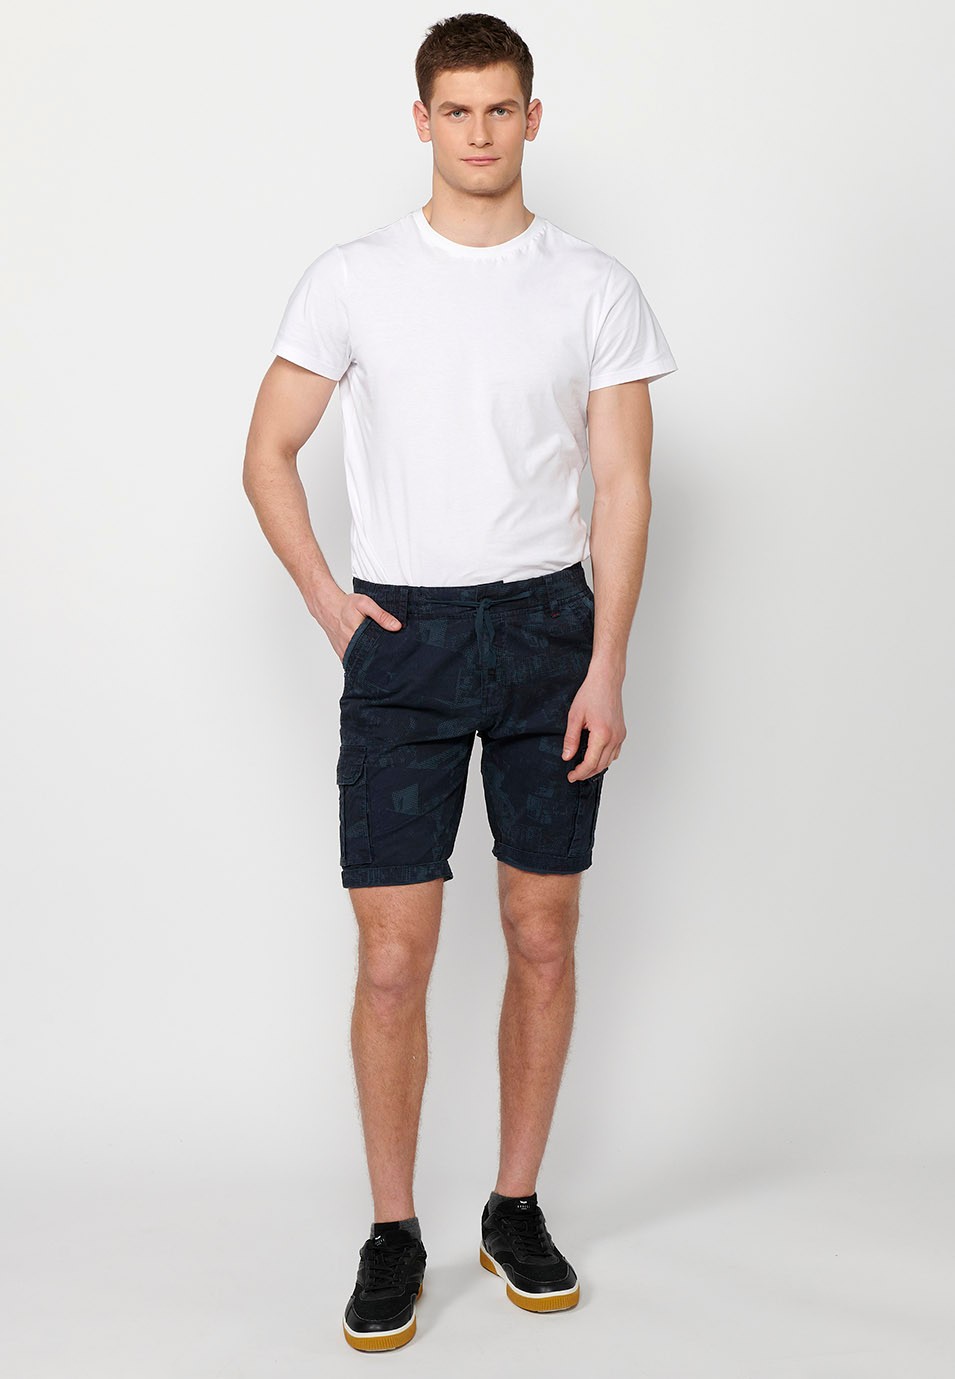 Cargo shorts with front closure with zipper and button and four pockets, two rear pockets with flap with two cargo pockets with flap and adjustable waist with drawstring in Blue for Men